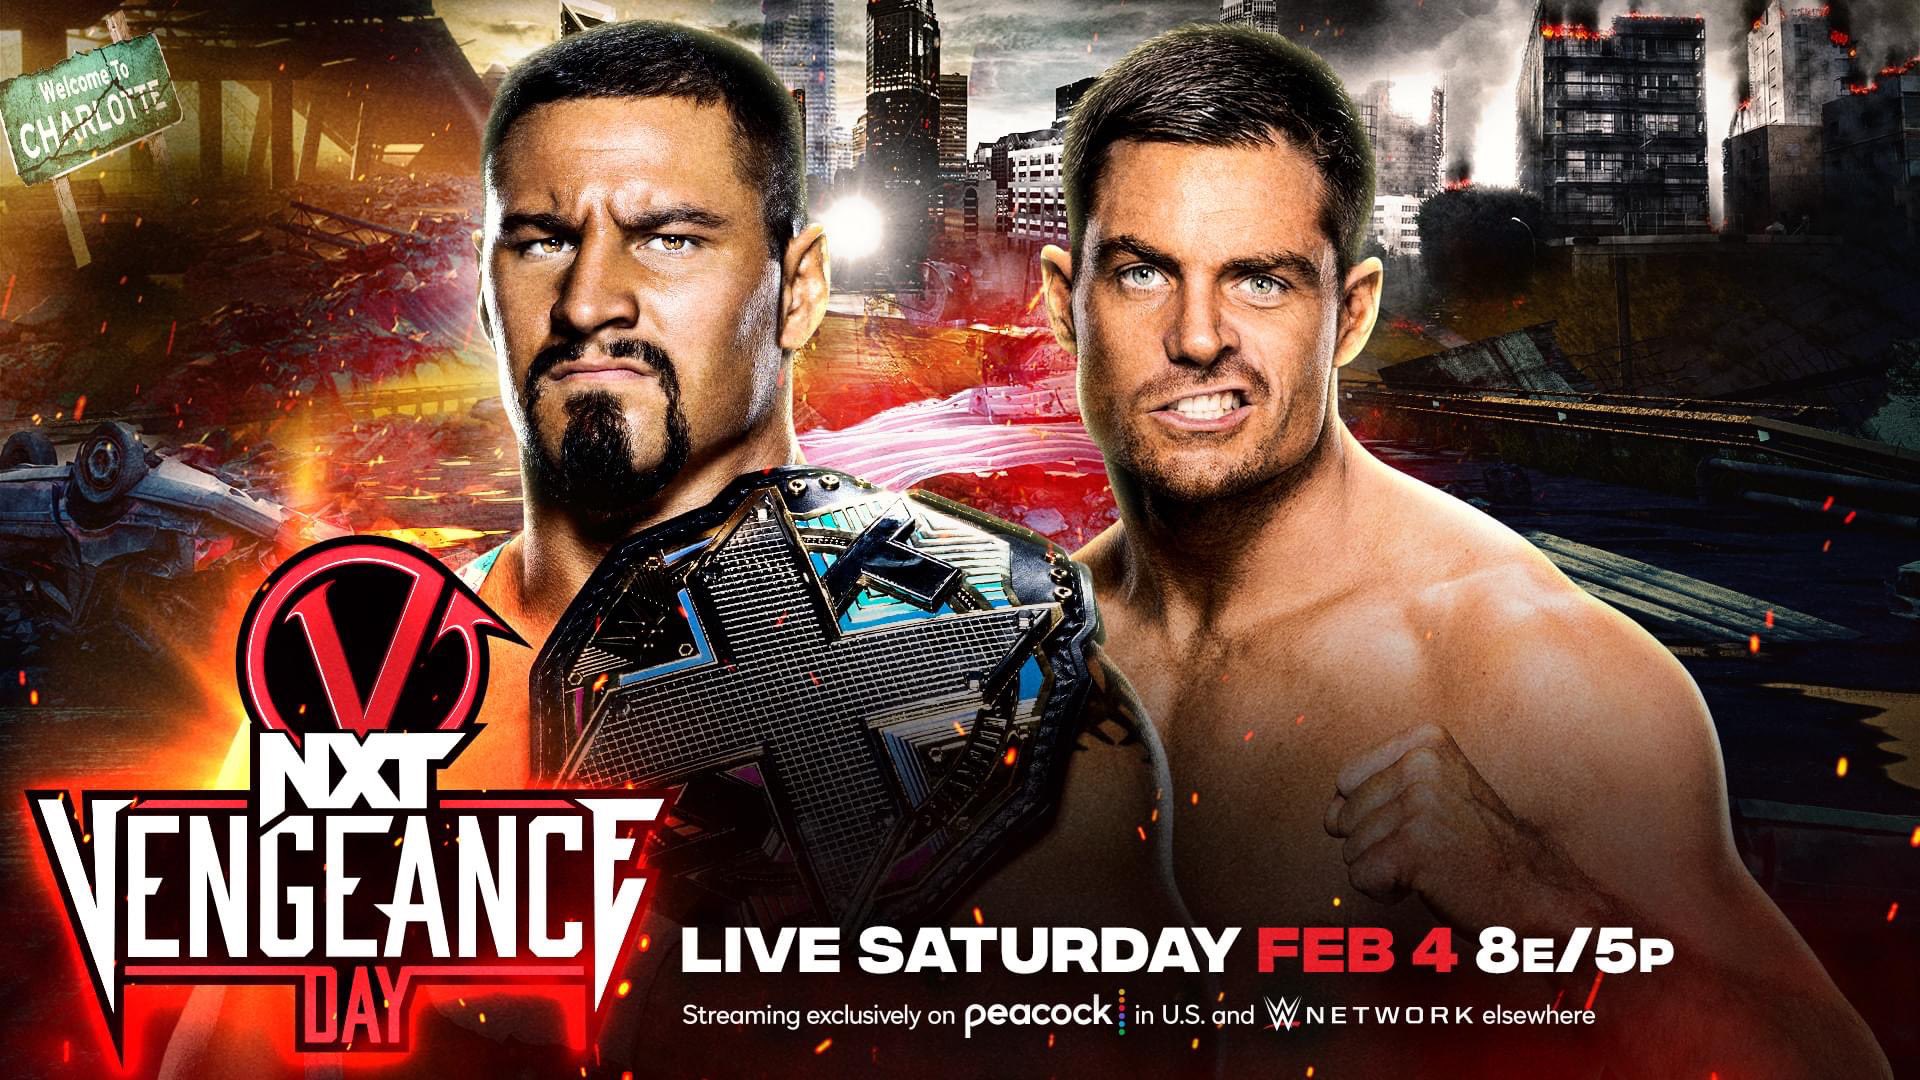 WWE NXT Vengeance Day 2023 Preview: Full Card, Match Predictions & More